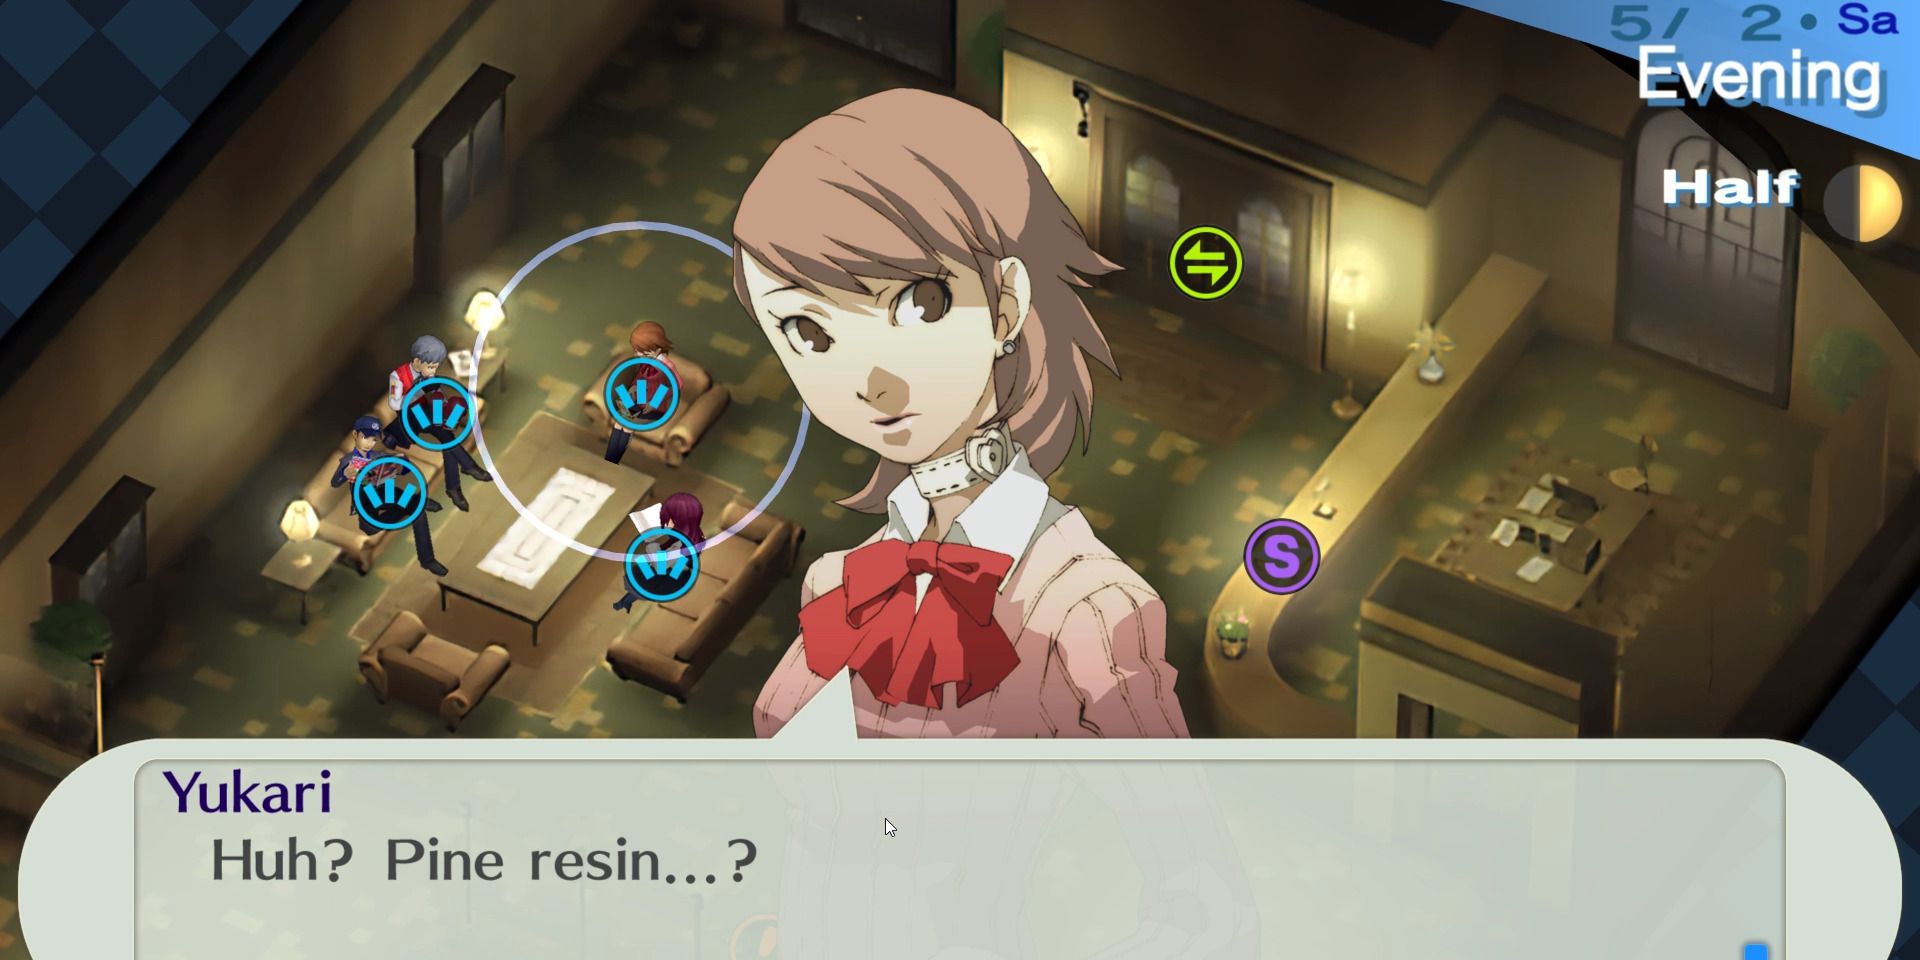 Image of the character Yukari talking about Pine Resin in Persona 3 Portable.